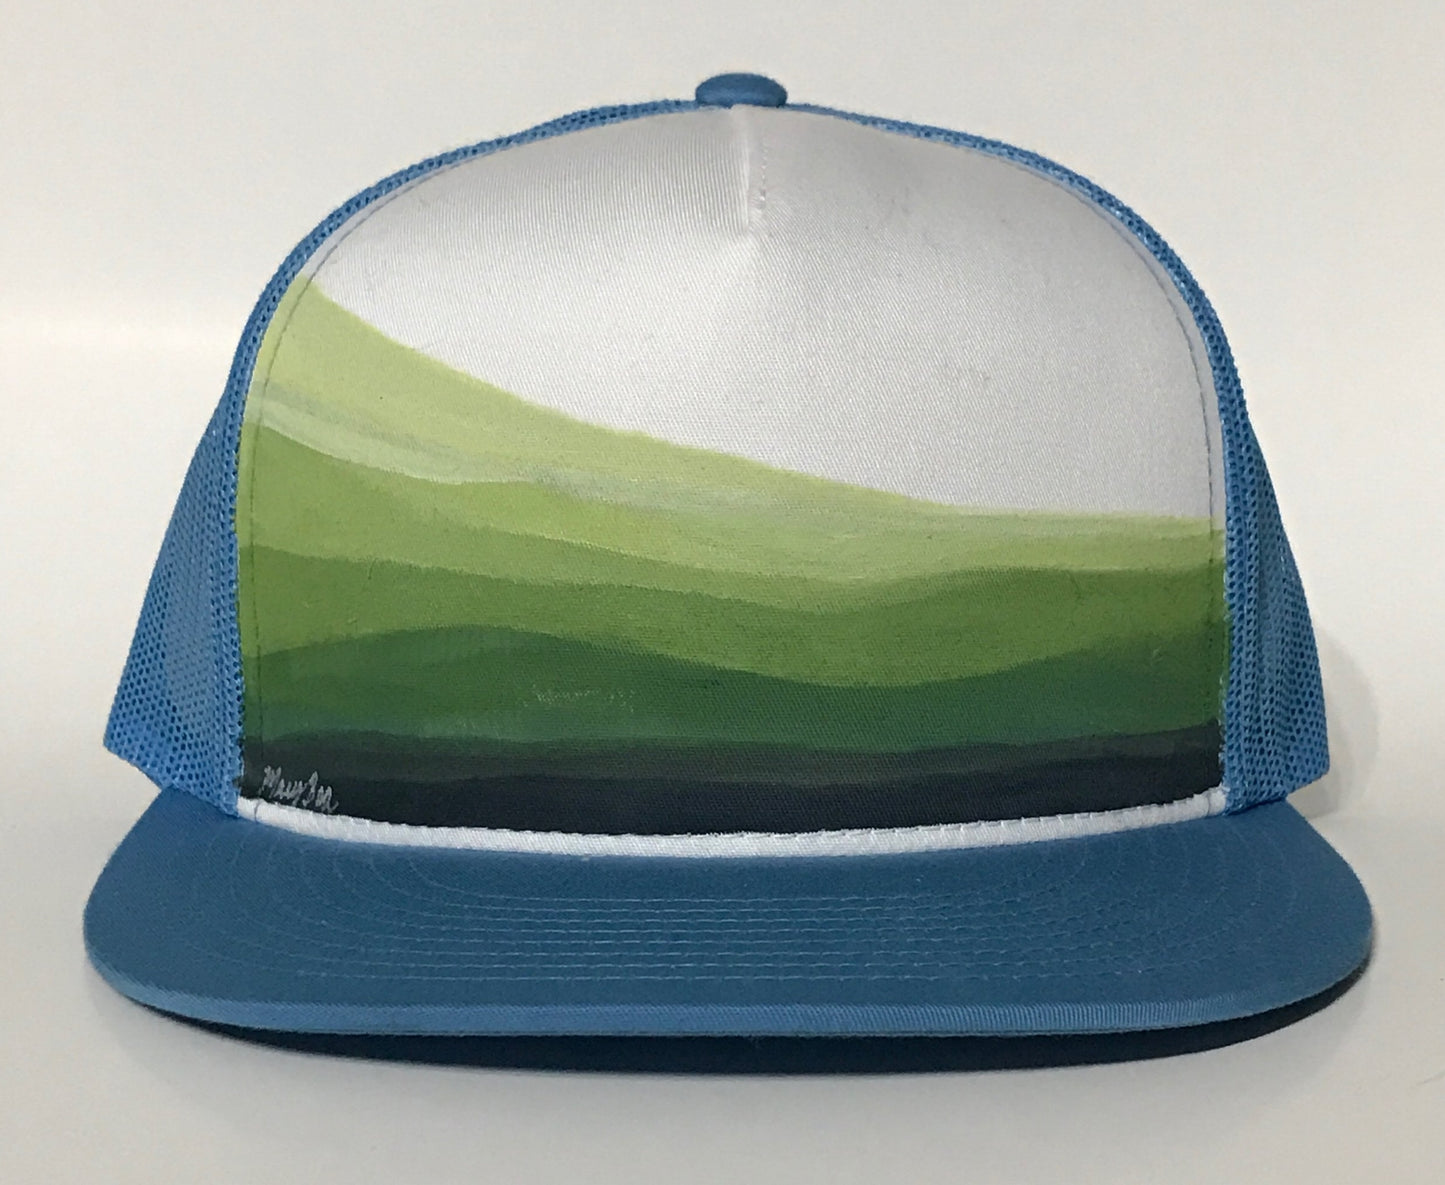 "Green Land" Hand Painted on Baby Blue Trucker Snapback